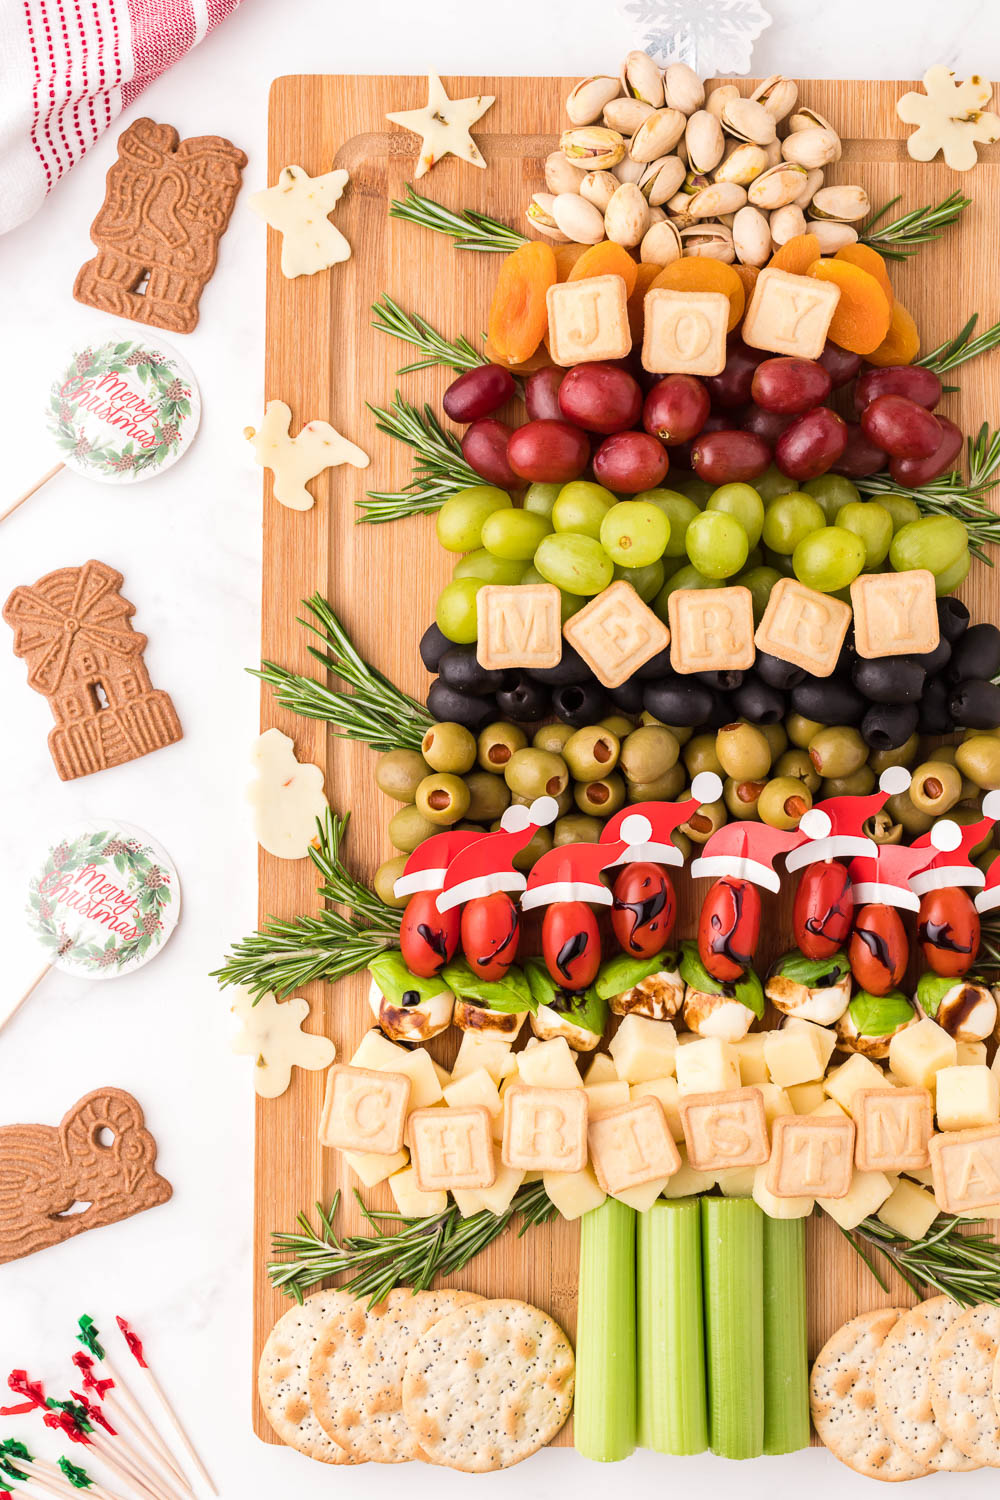 A wooden board with snacks, fruits and food in the shape of a Christmas tree with cookies and signs on the side.